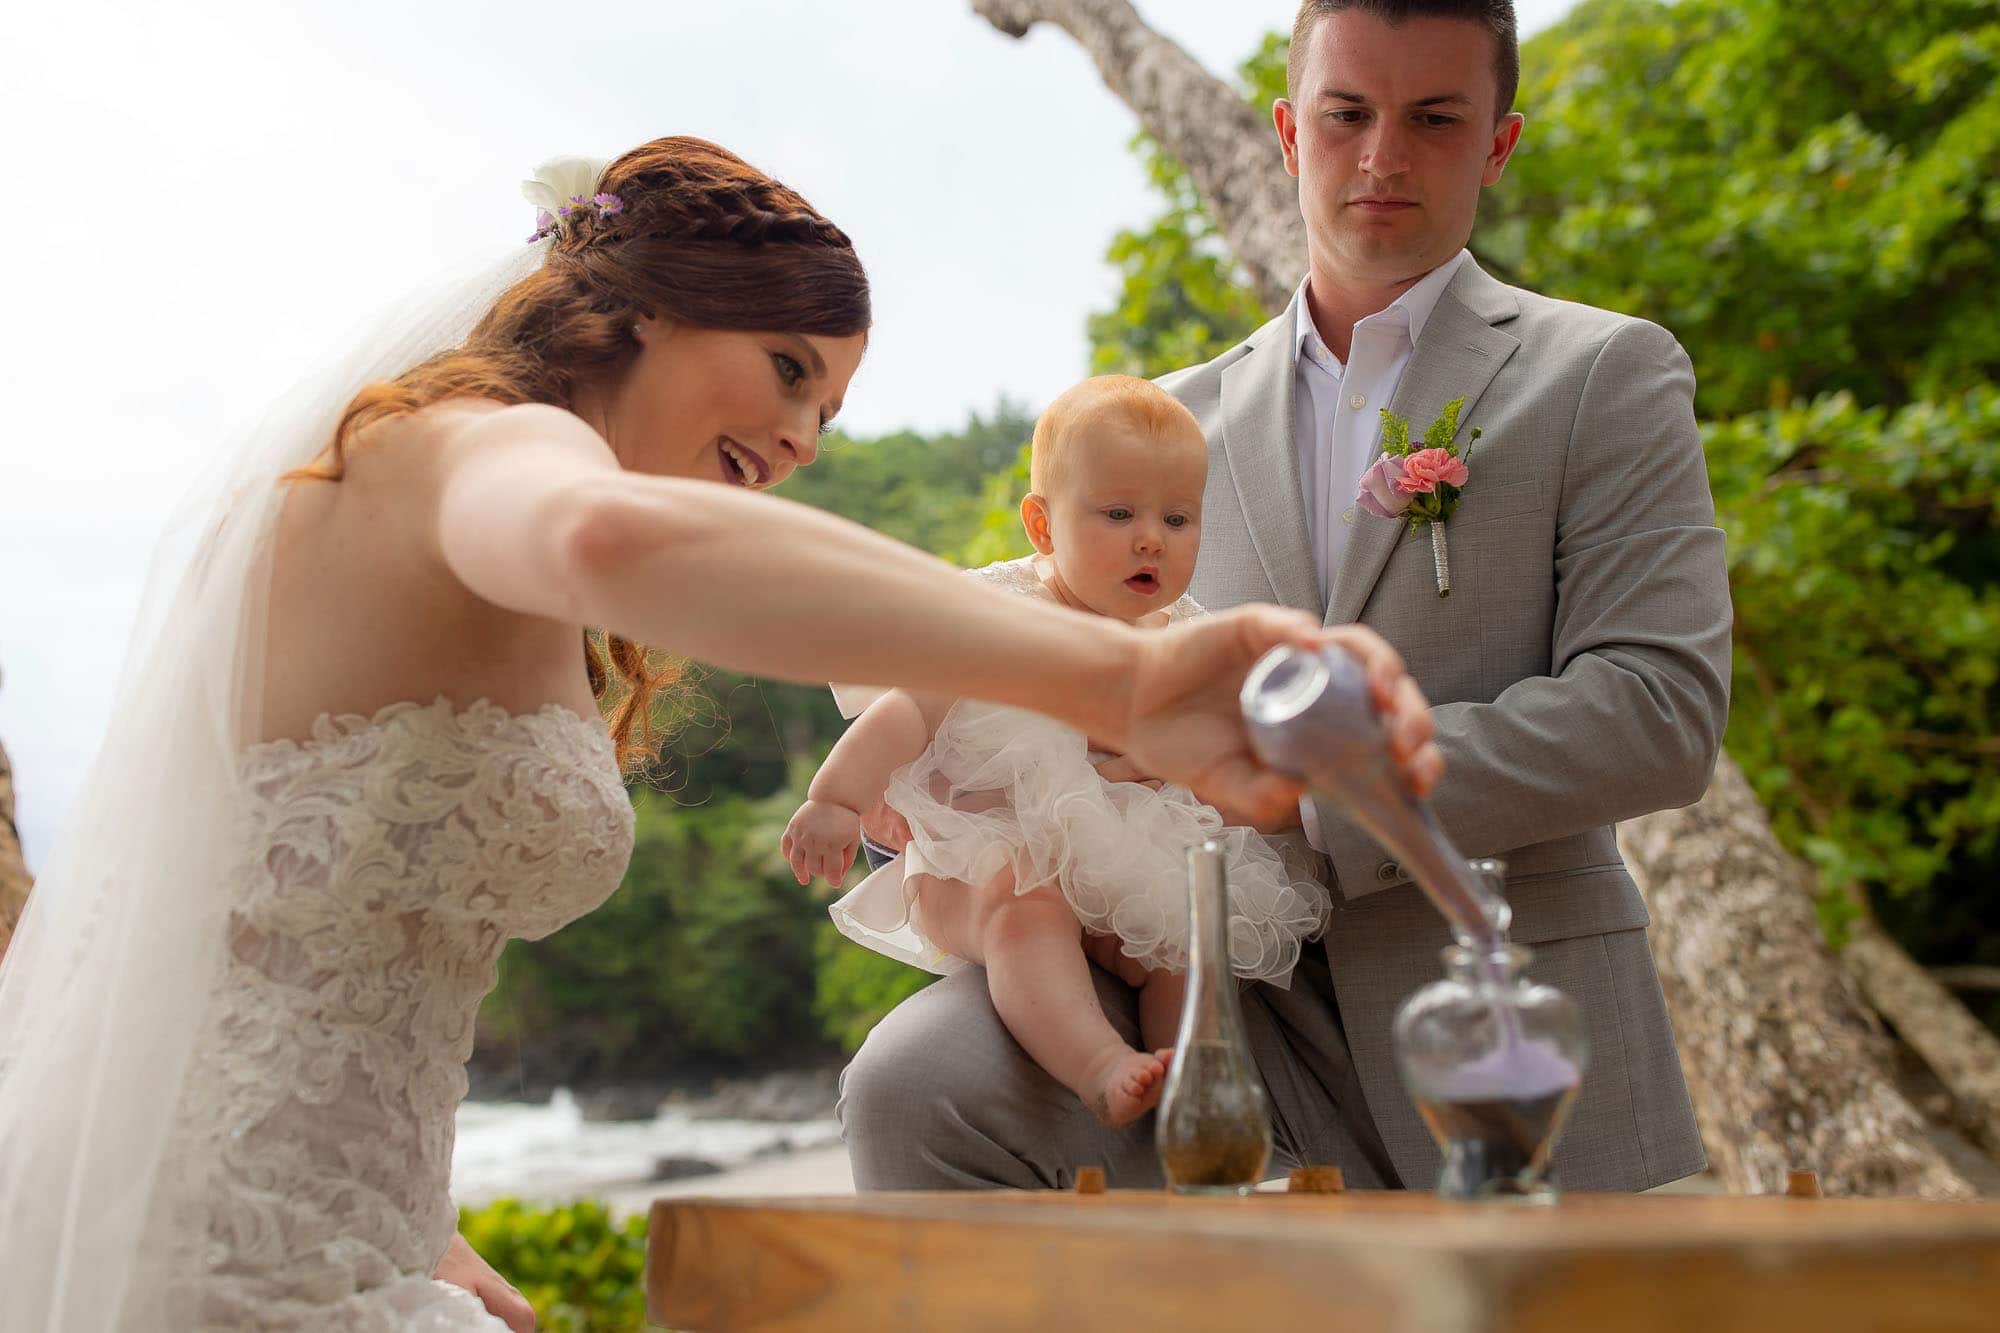 Bride pouring unity sand while groom and baby look on